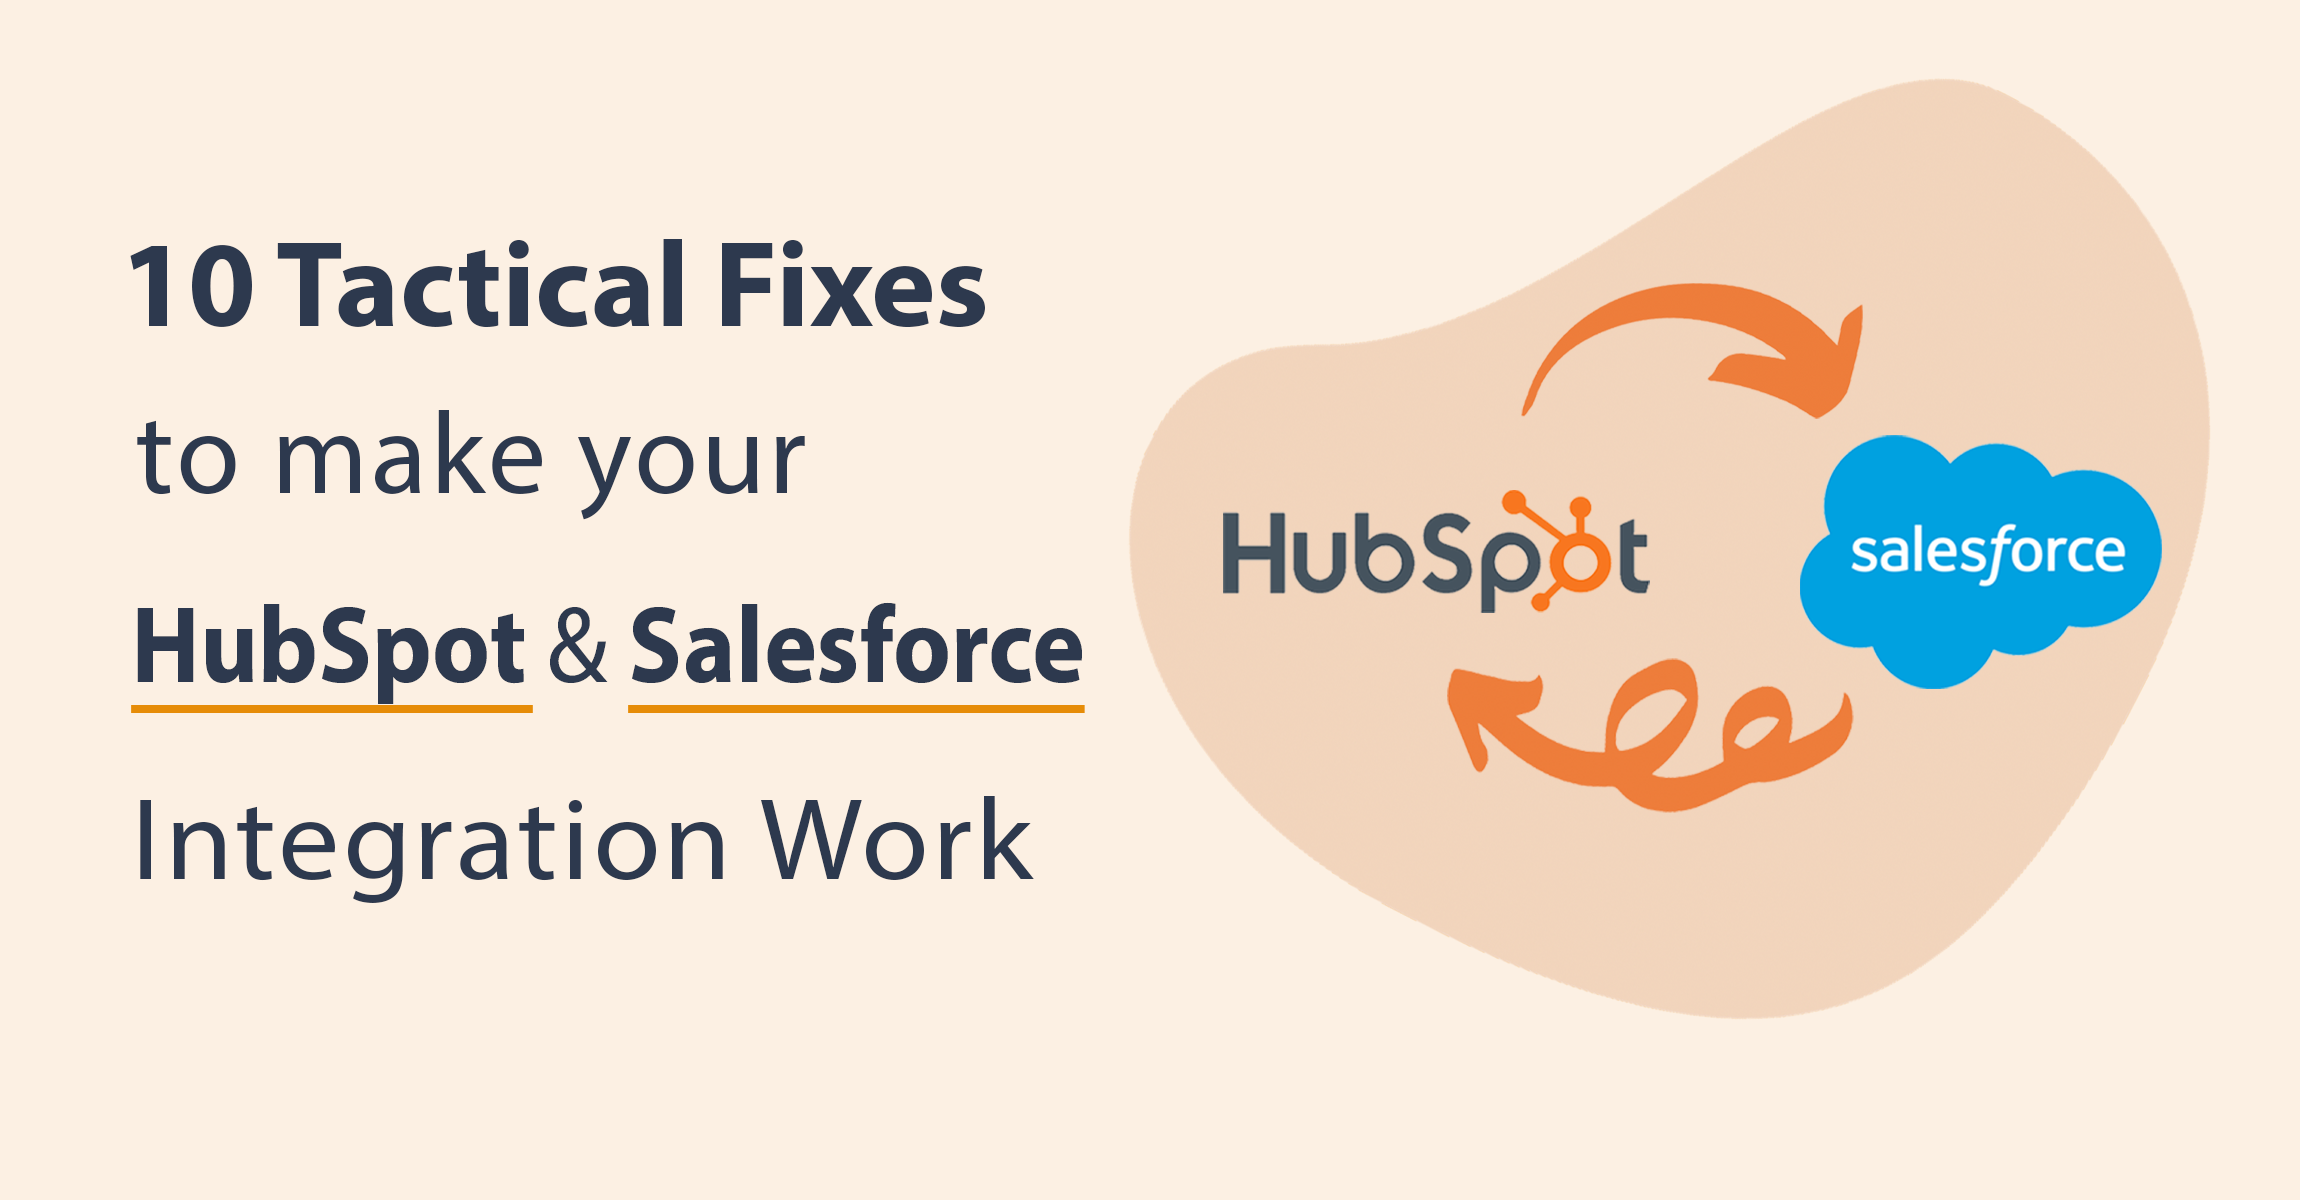 10 Tactical Fixes to Make your Hubspot and Salesforce Integration Work